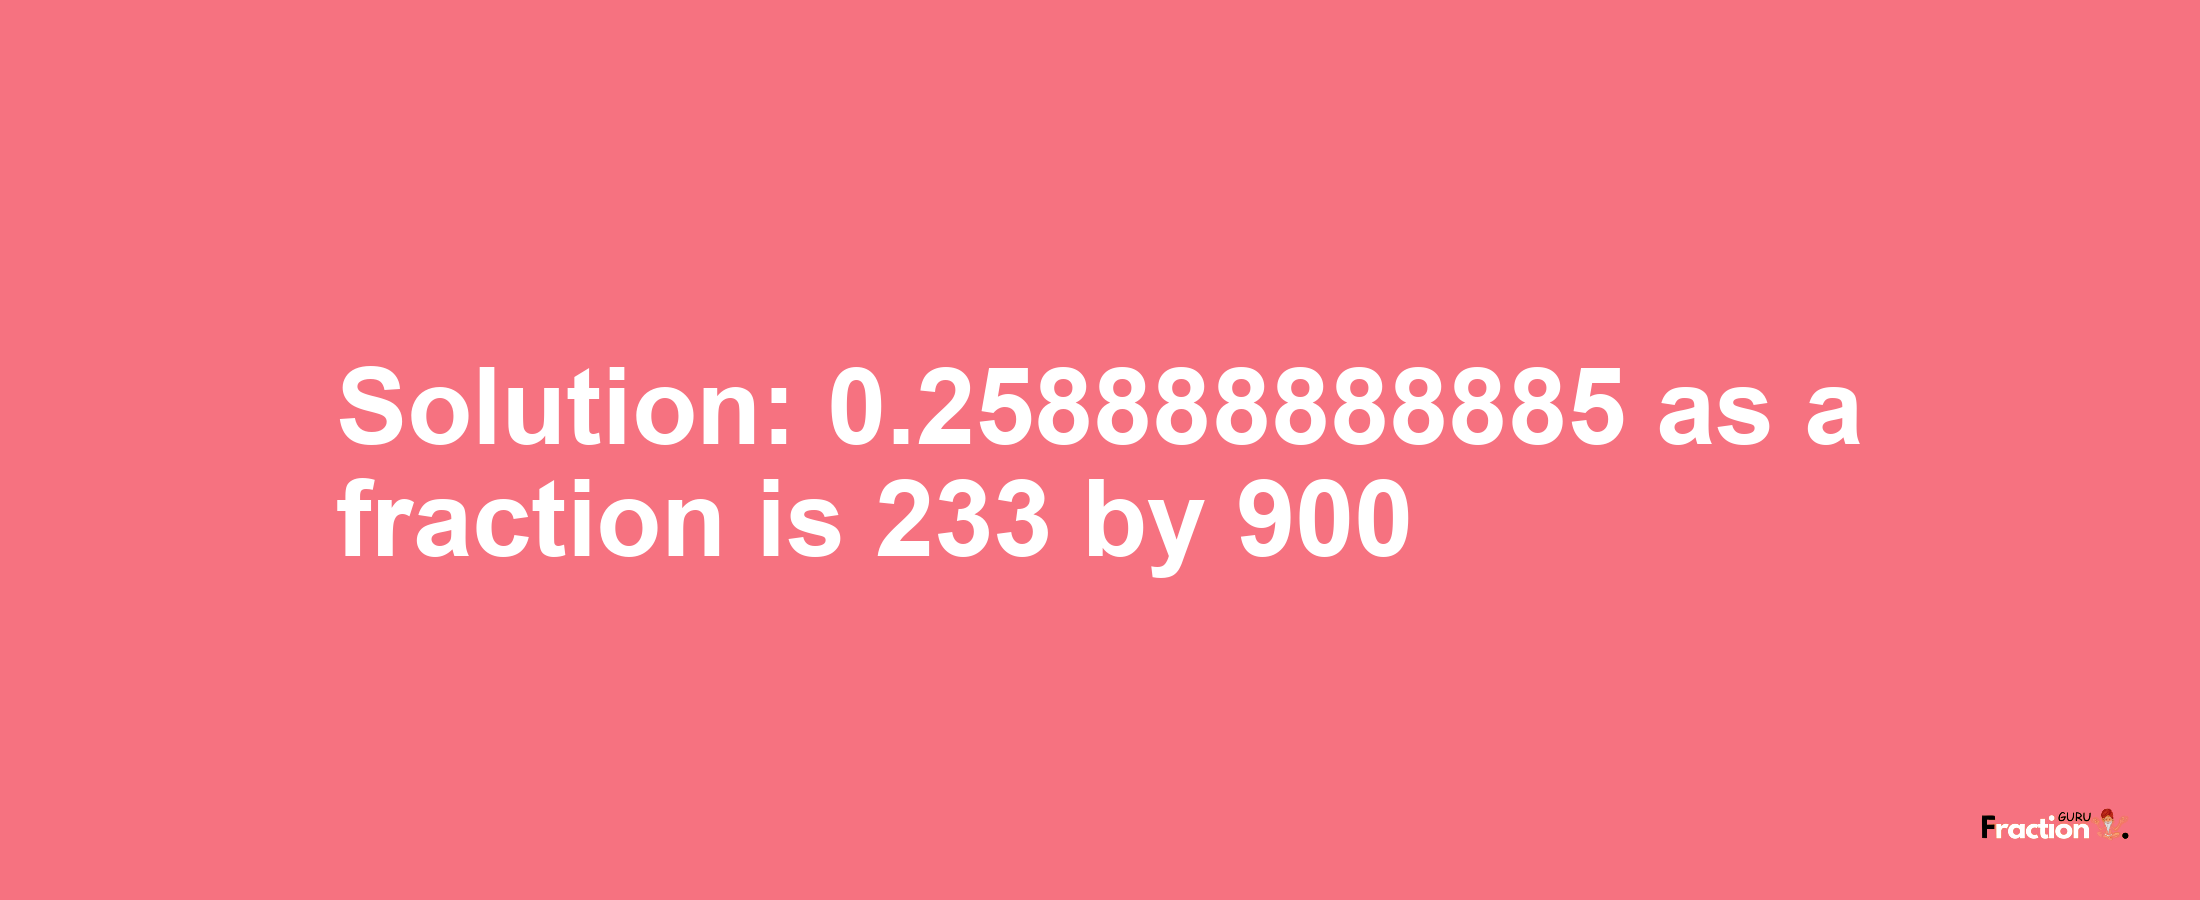 Solution:0.258888888885 as a fraction is 233/900